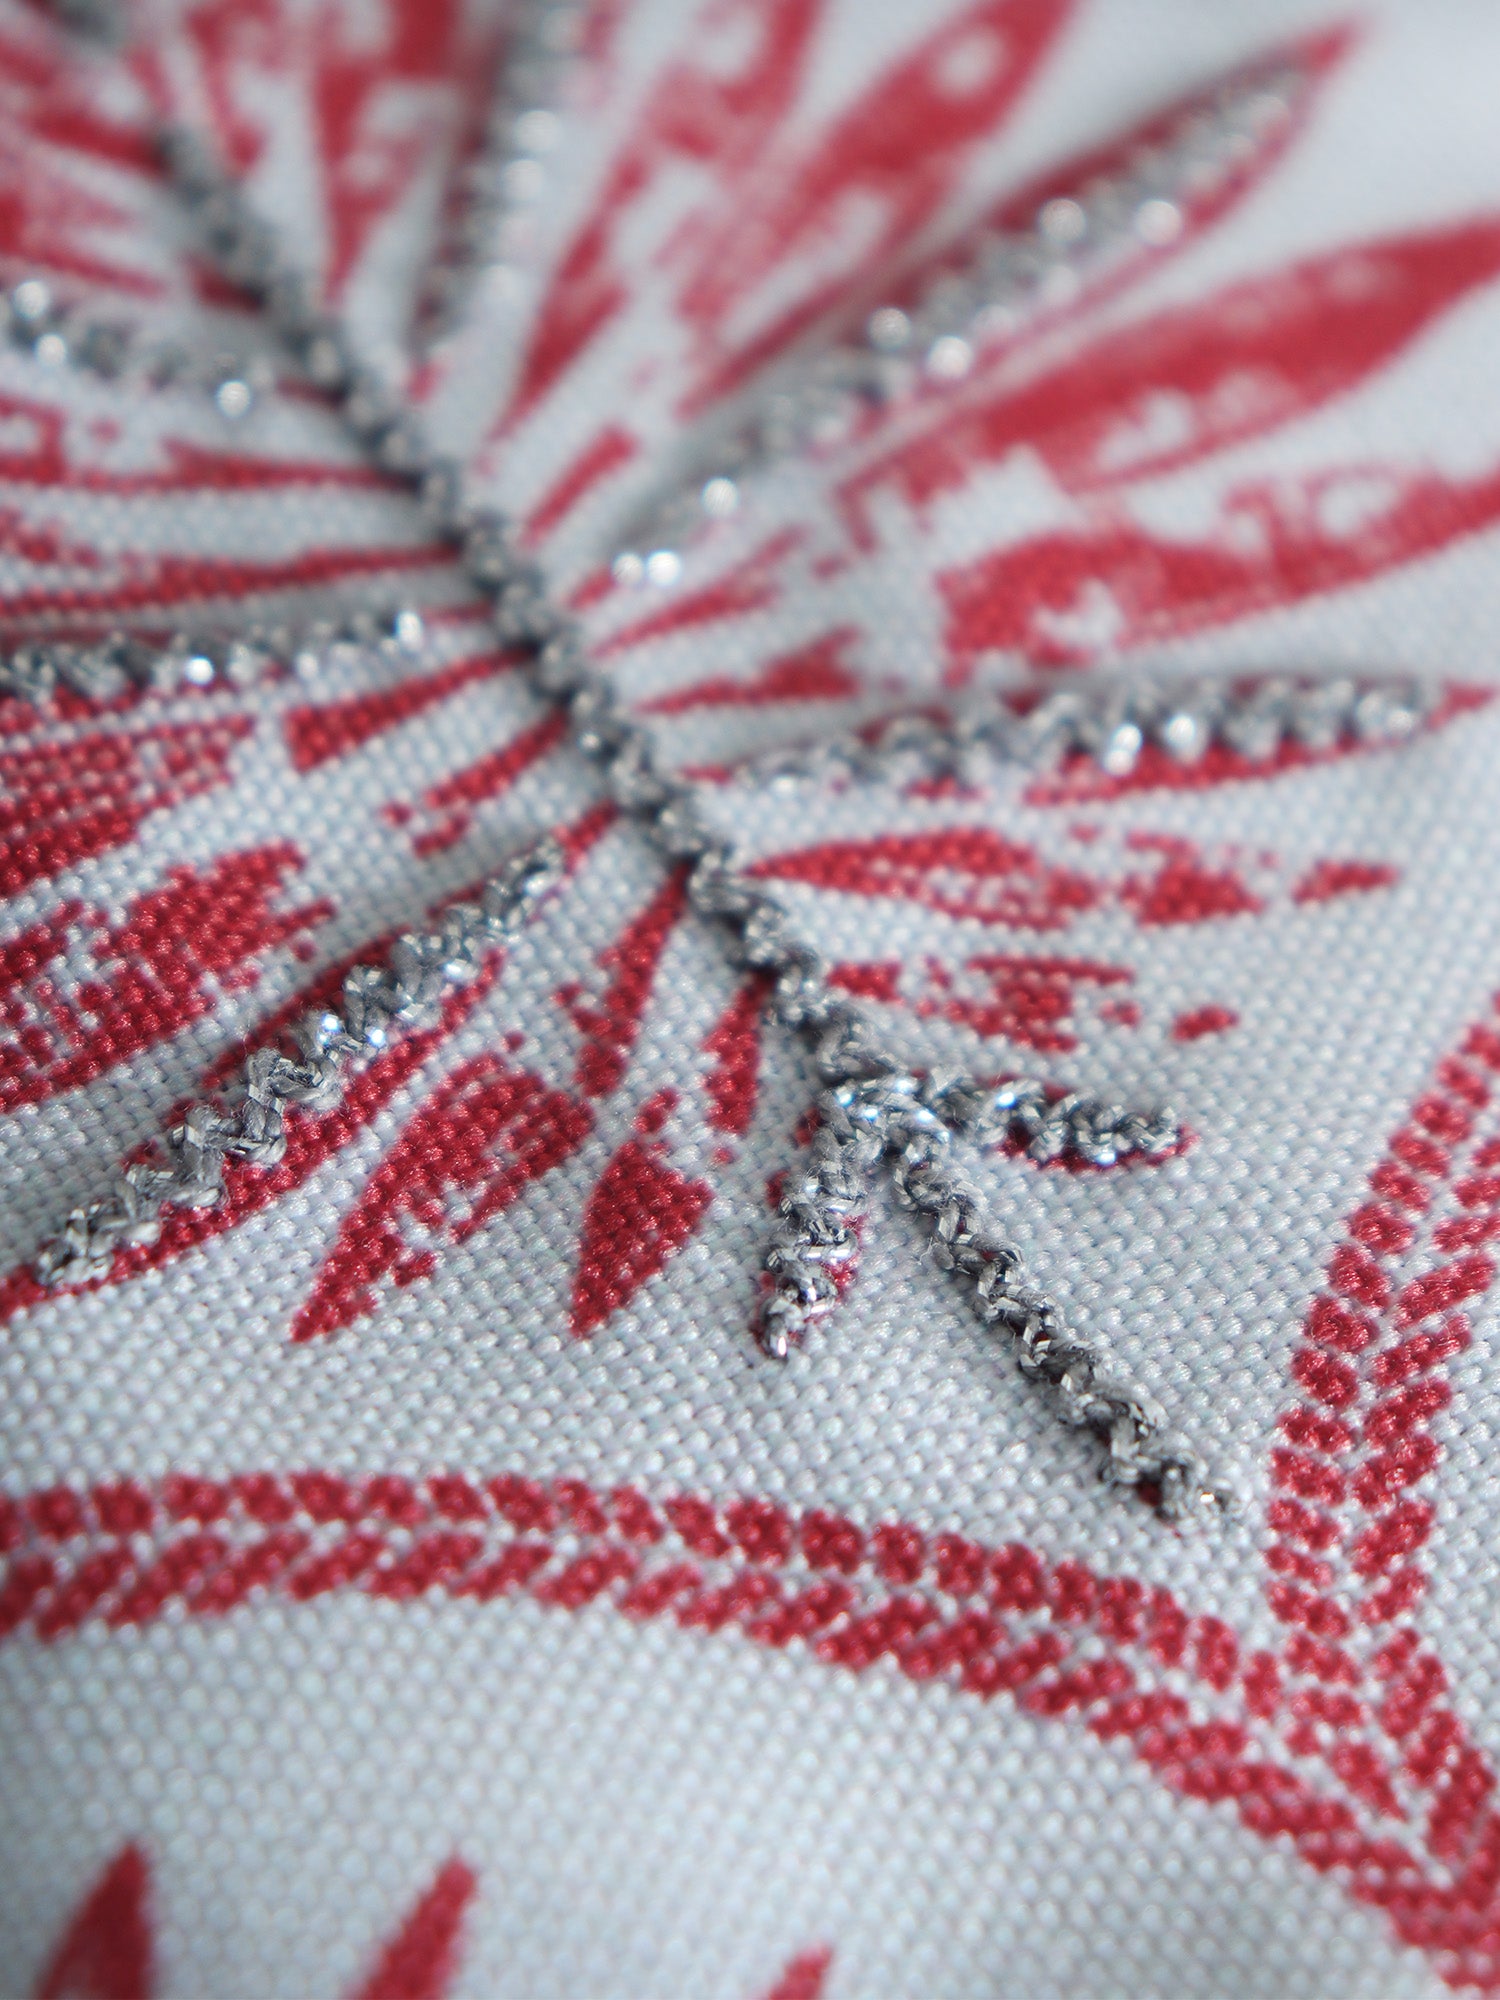 closeup of hand embroidered table runner with tassels - 12x84 inch